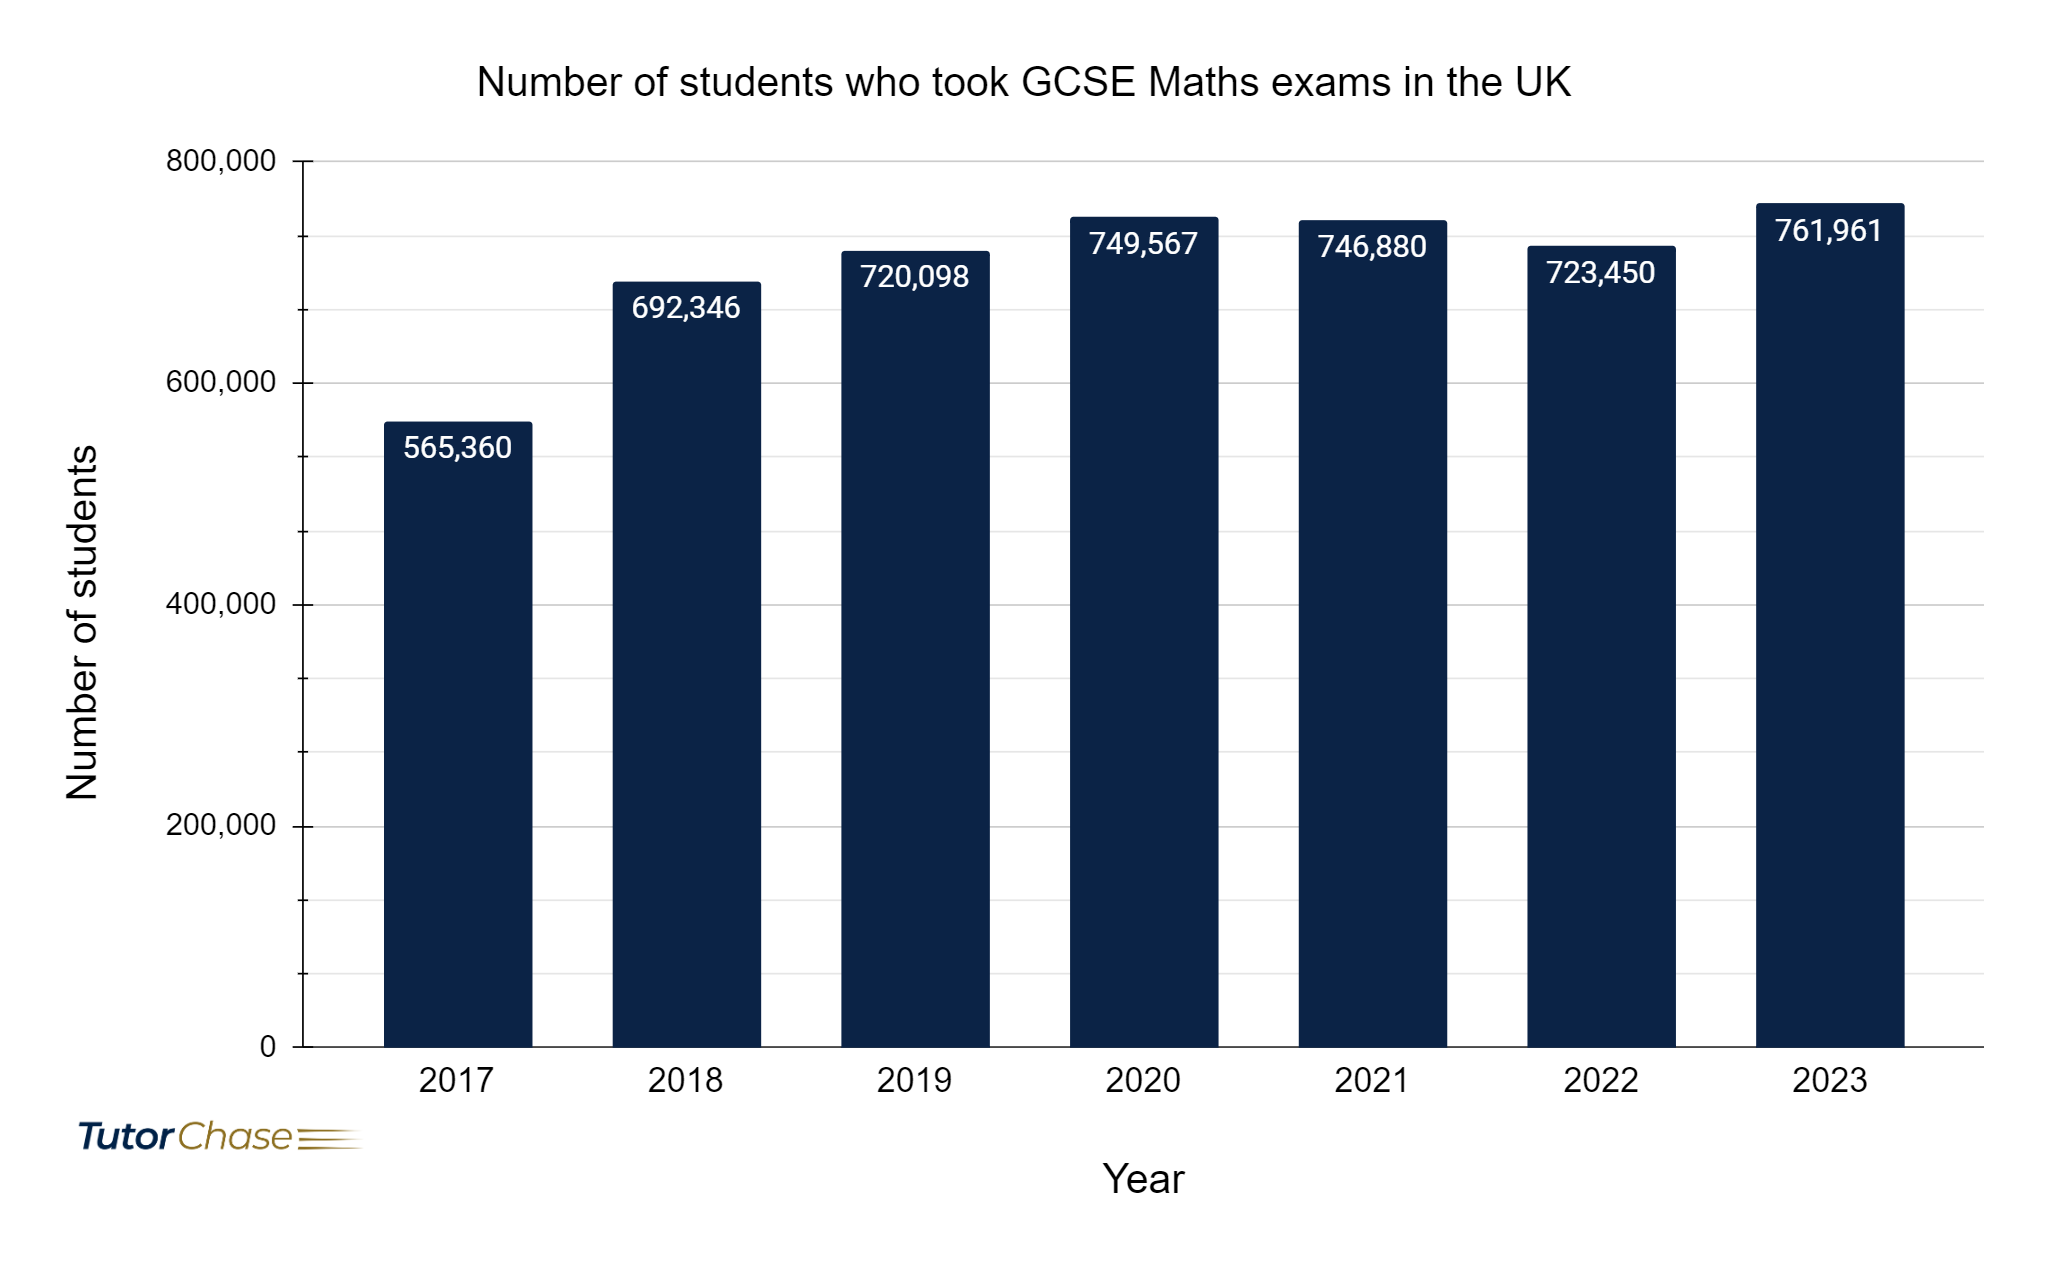 Number of students who took GCSE Maths exams in the UK